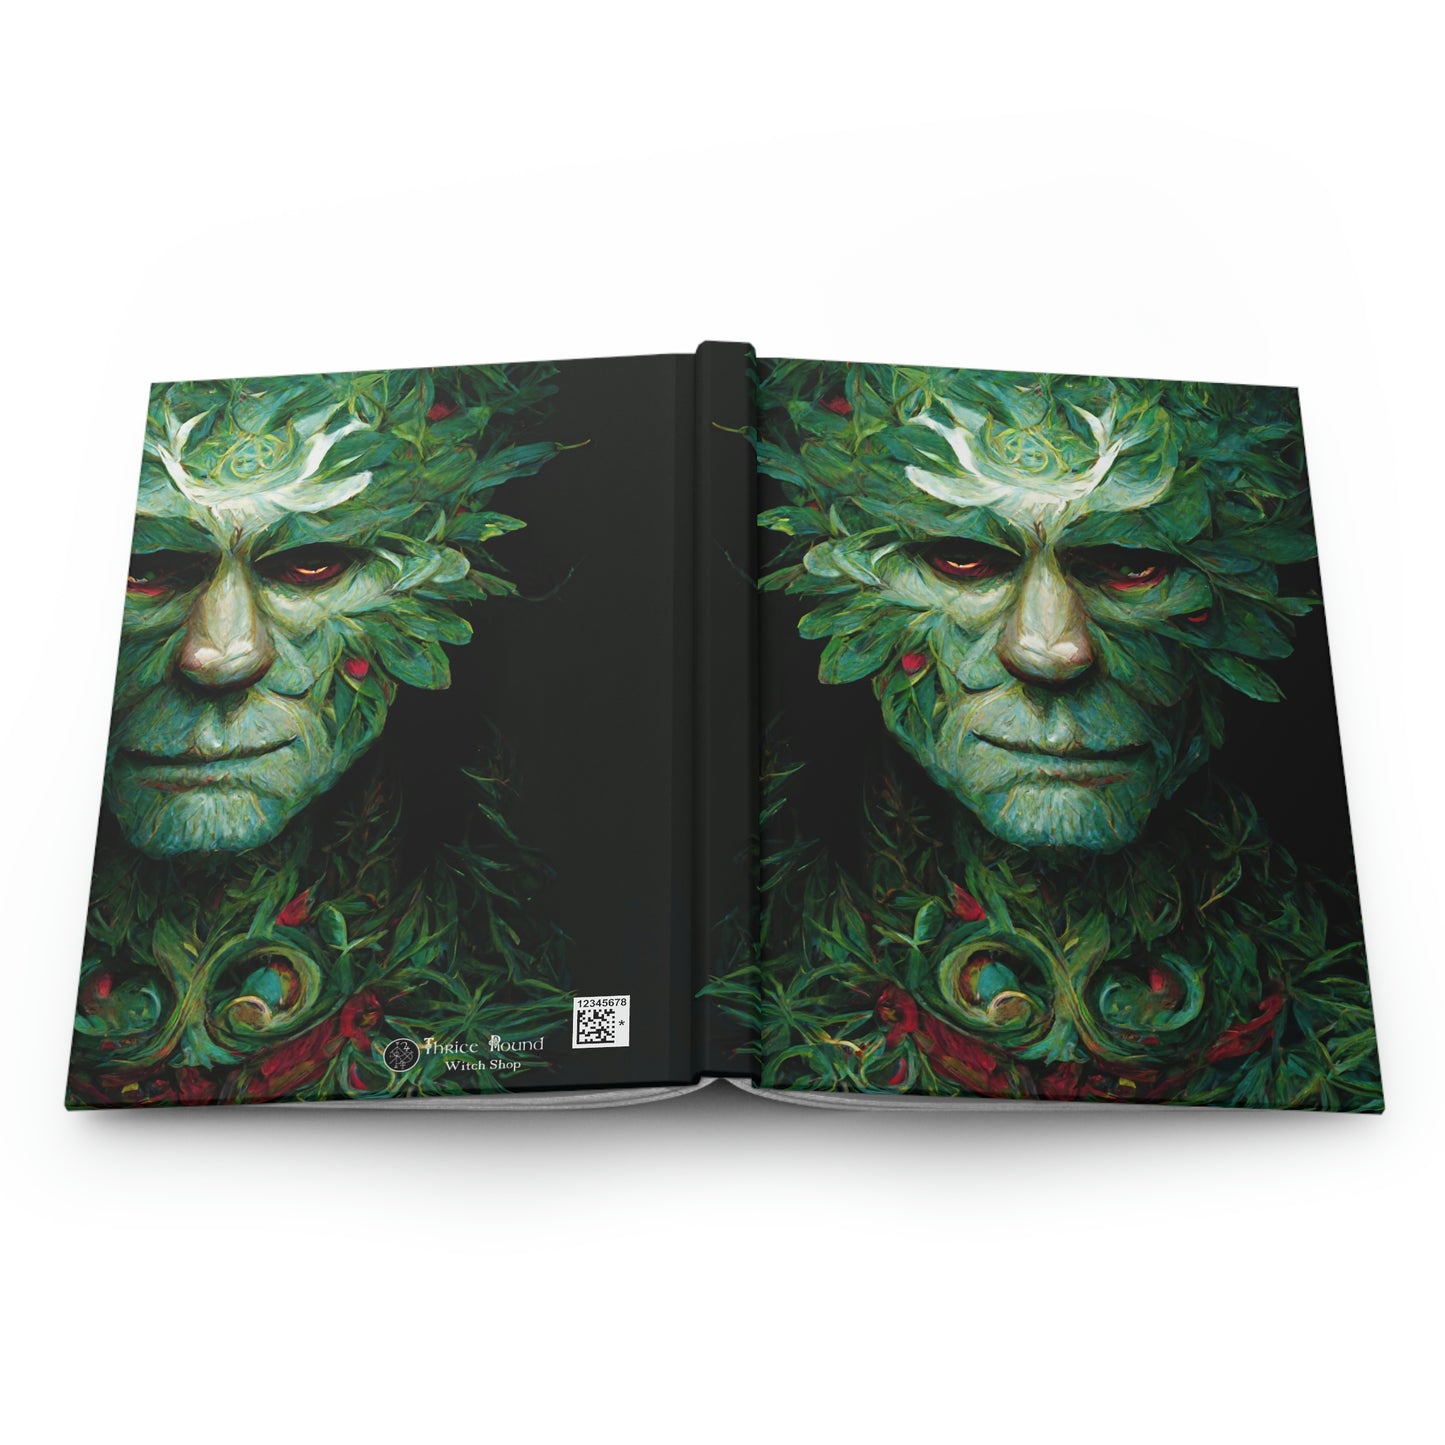 Book of Shadows - The Green Man - Hardcover Grimoire for Witches, Pagans, Wiccans - 150 lined page notebook Holly King